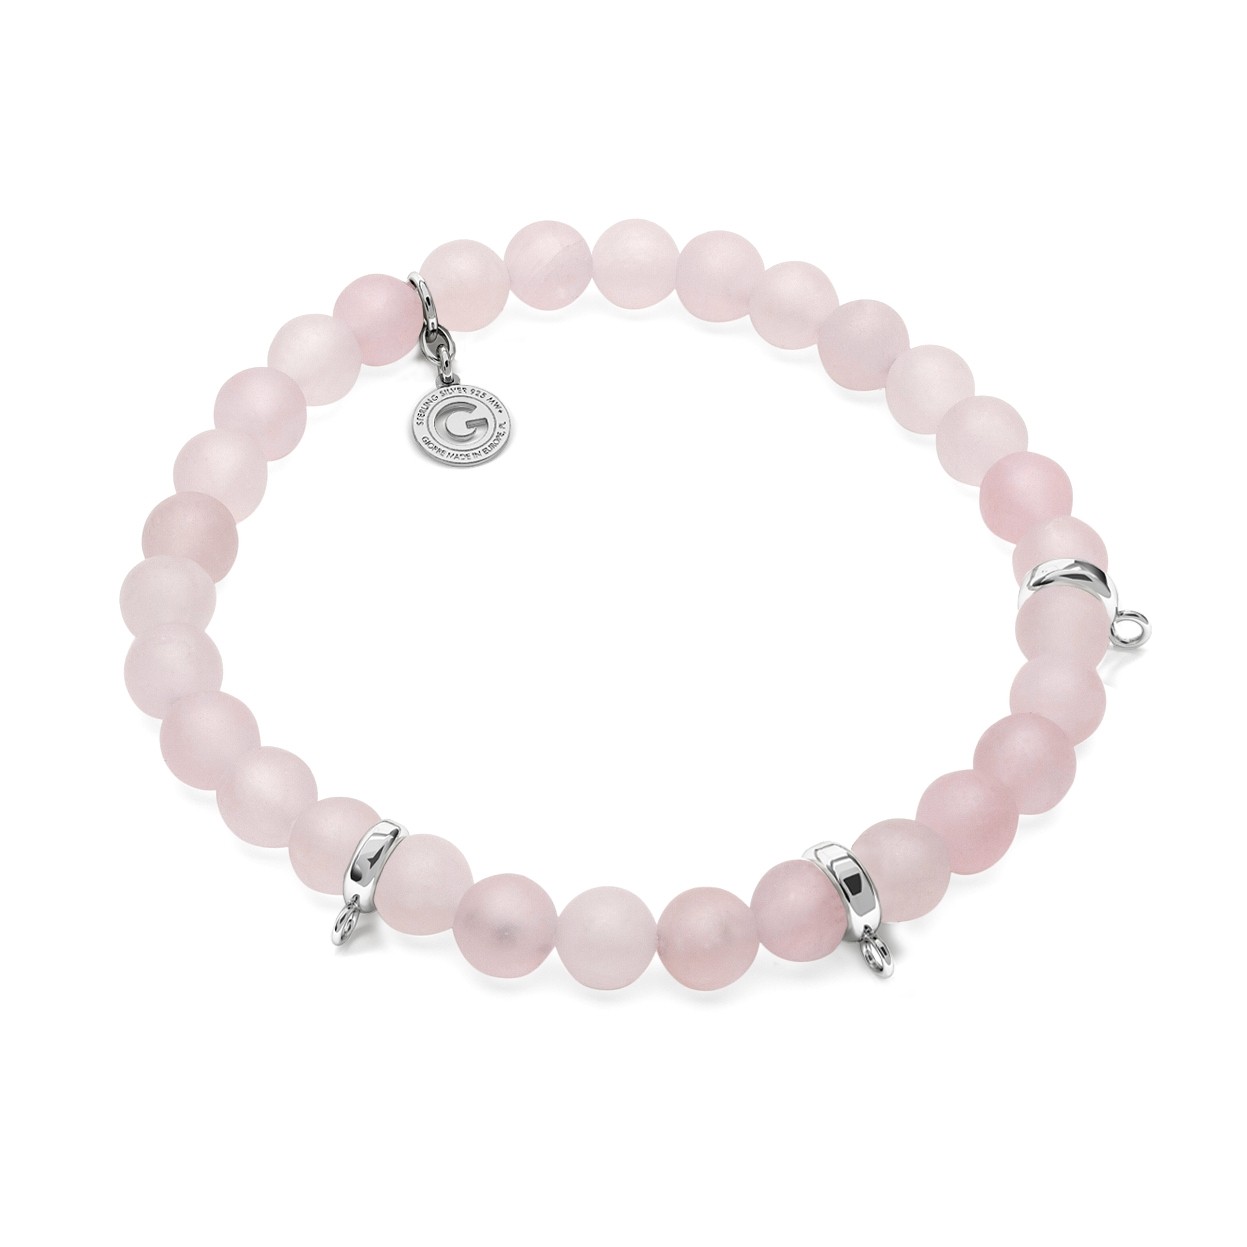 PINK QUARZ, FLEXIBLE BRACELET FOR 3 CHARMS, WITH NATURAL STONES